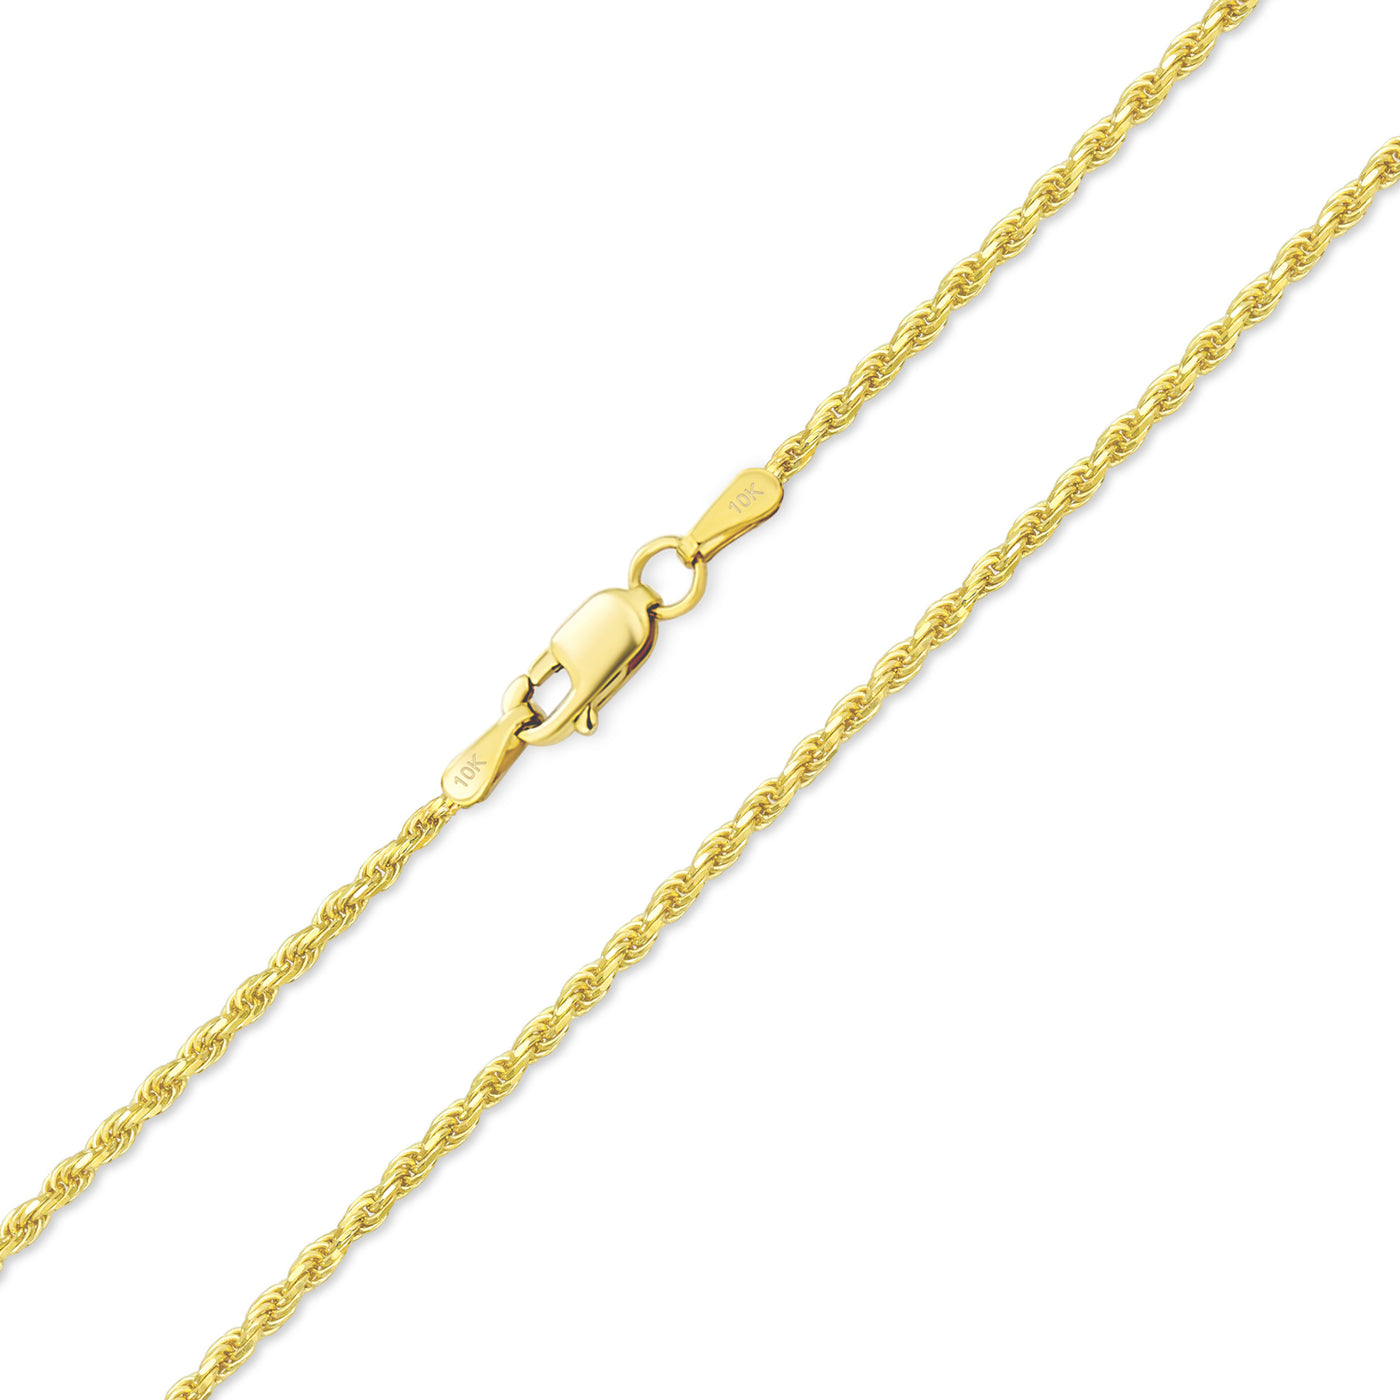 Real Yellow 10K Gold Cable Rope Chain 3MM Necklace 16,18 20 22 24"